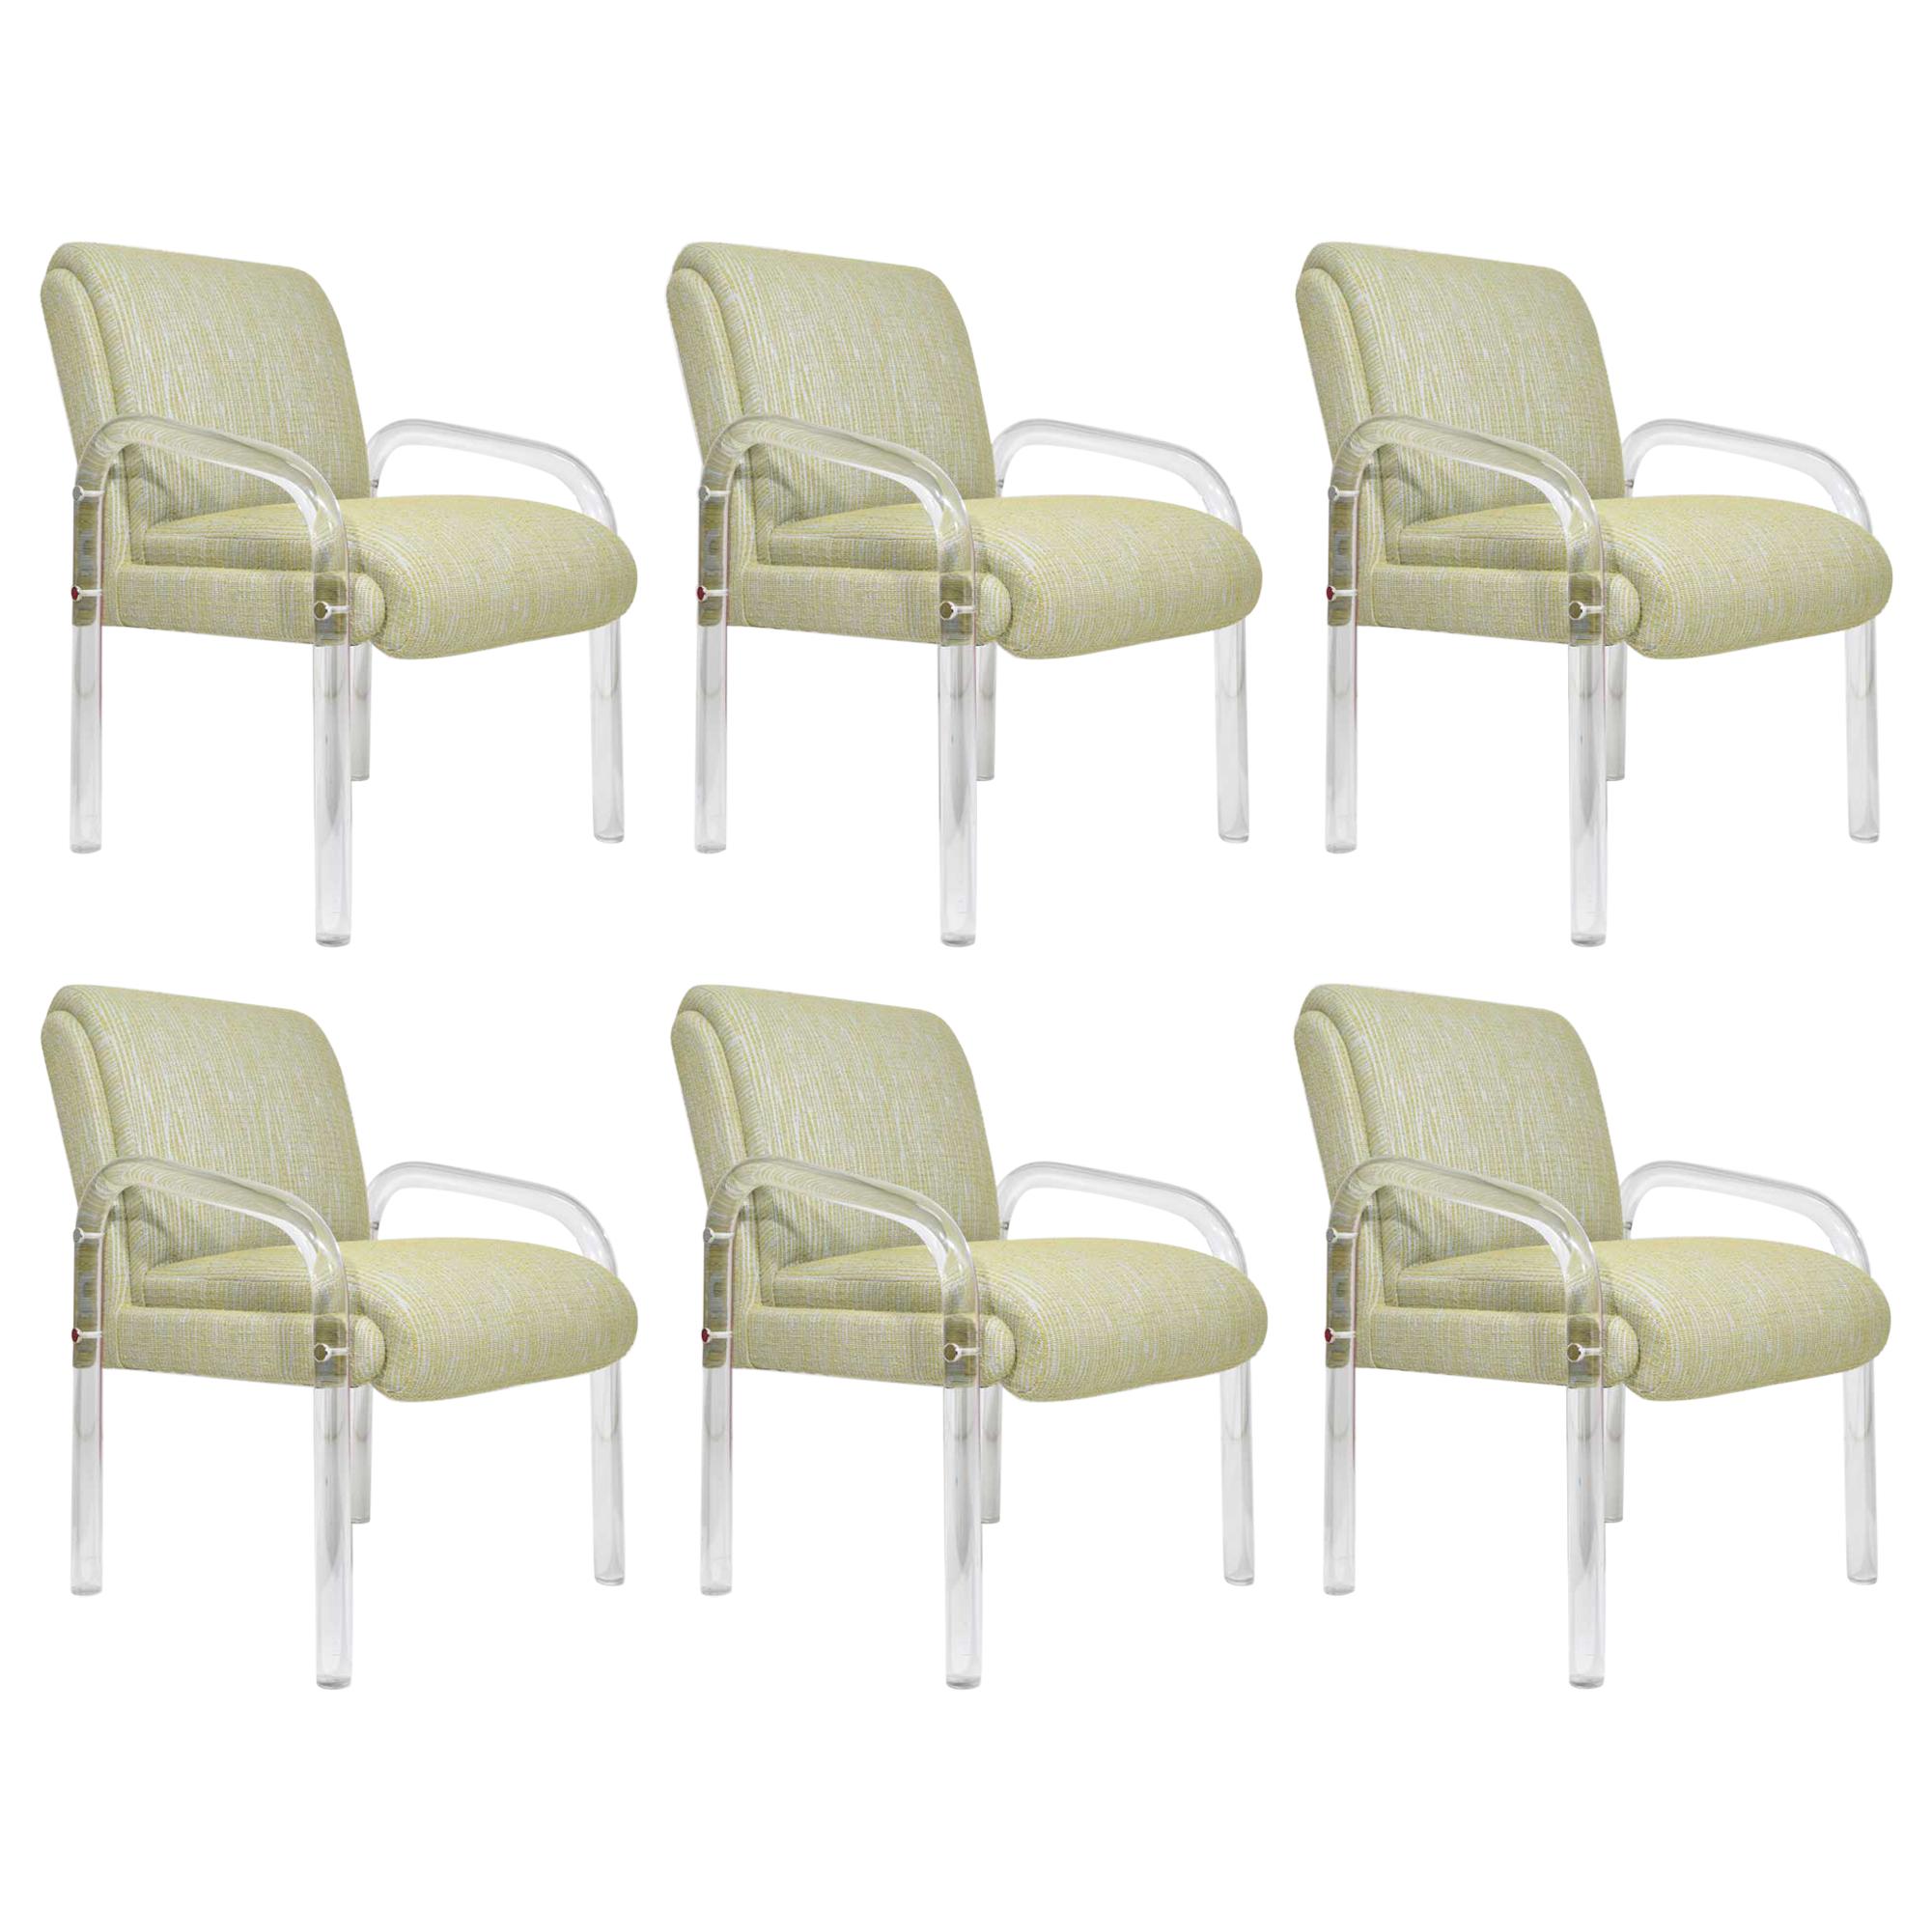 Leon Rosen for Pace Collection Lucite Dining Chairs, Six